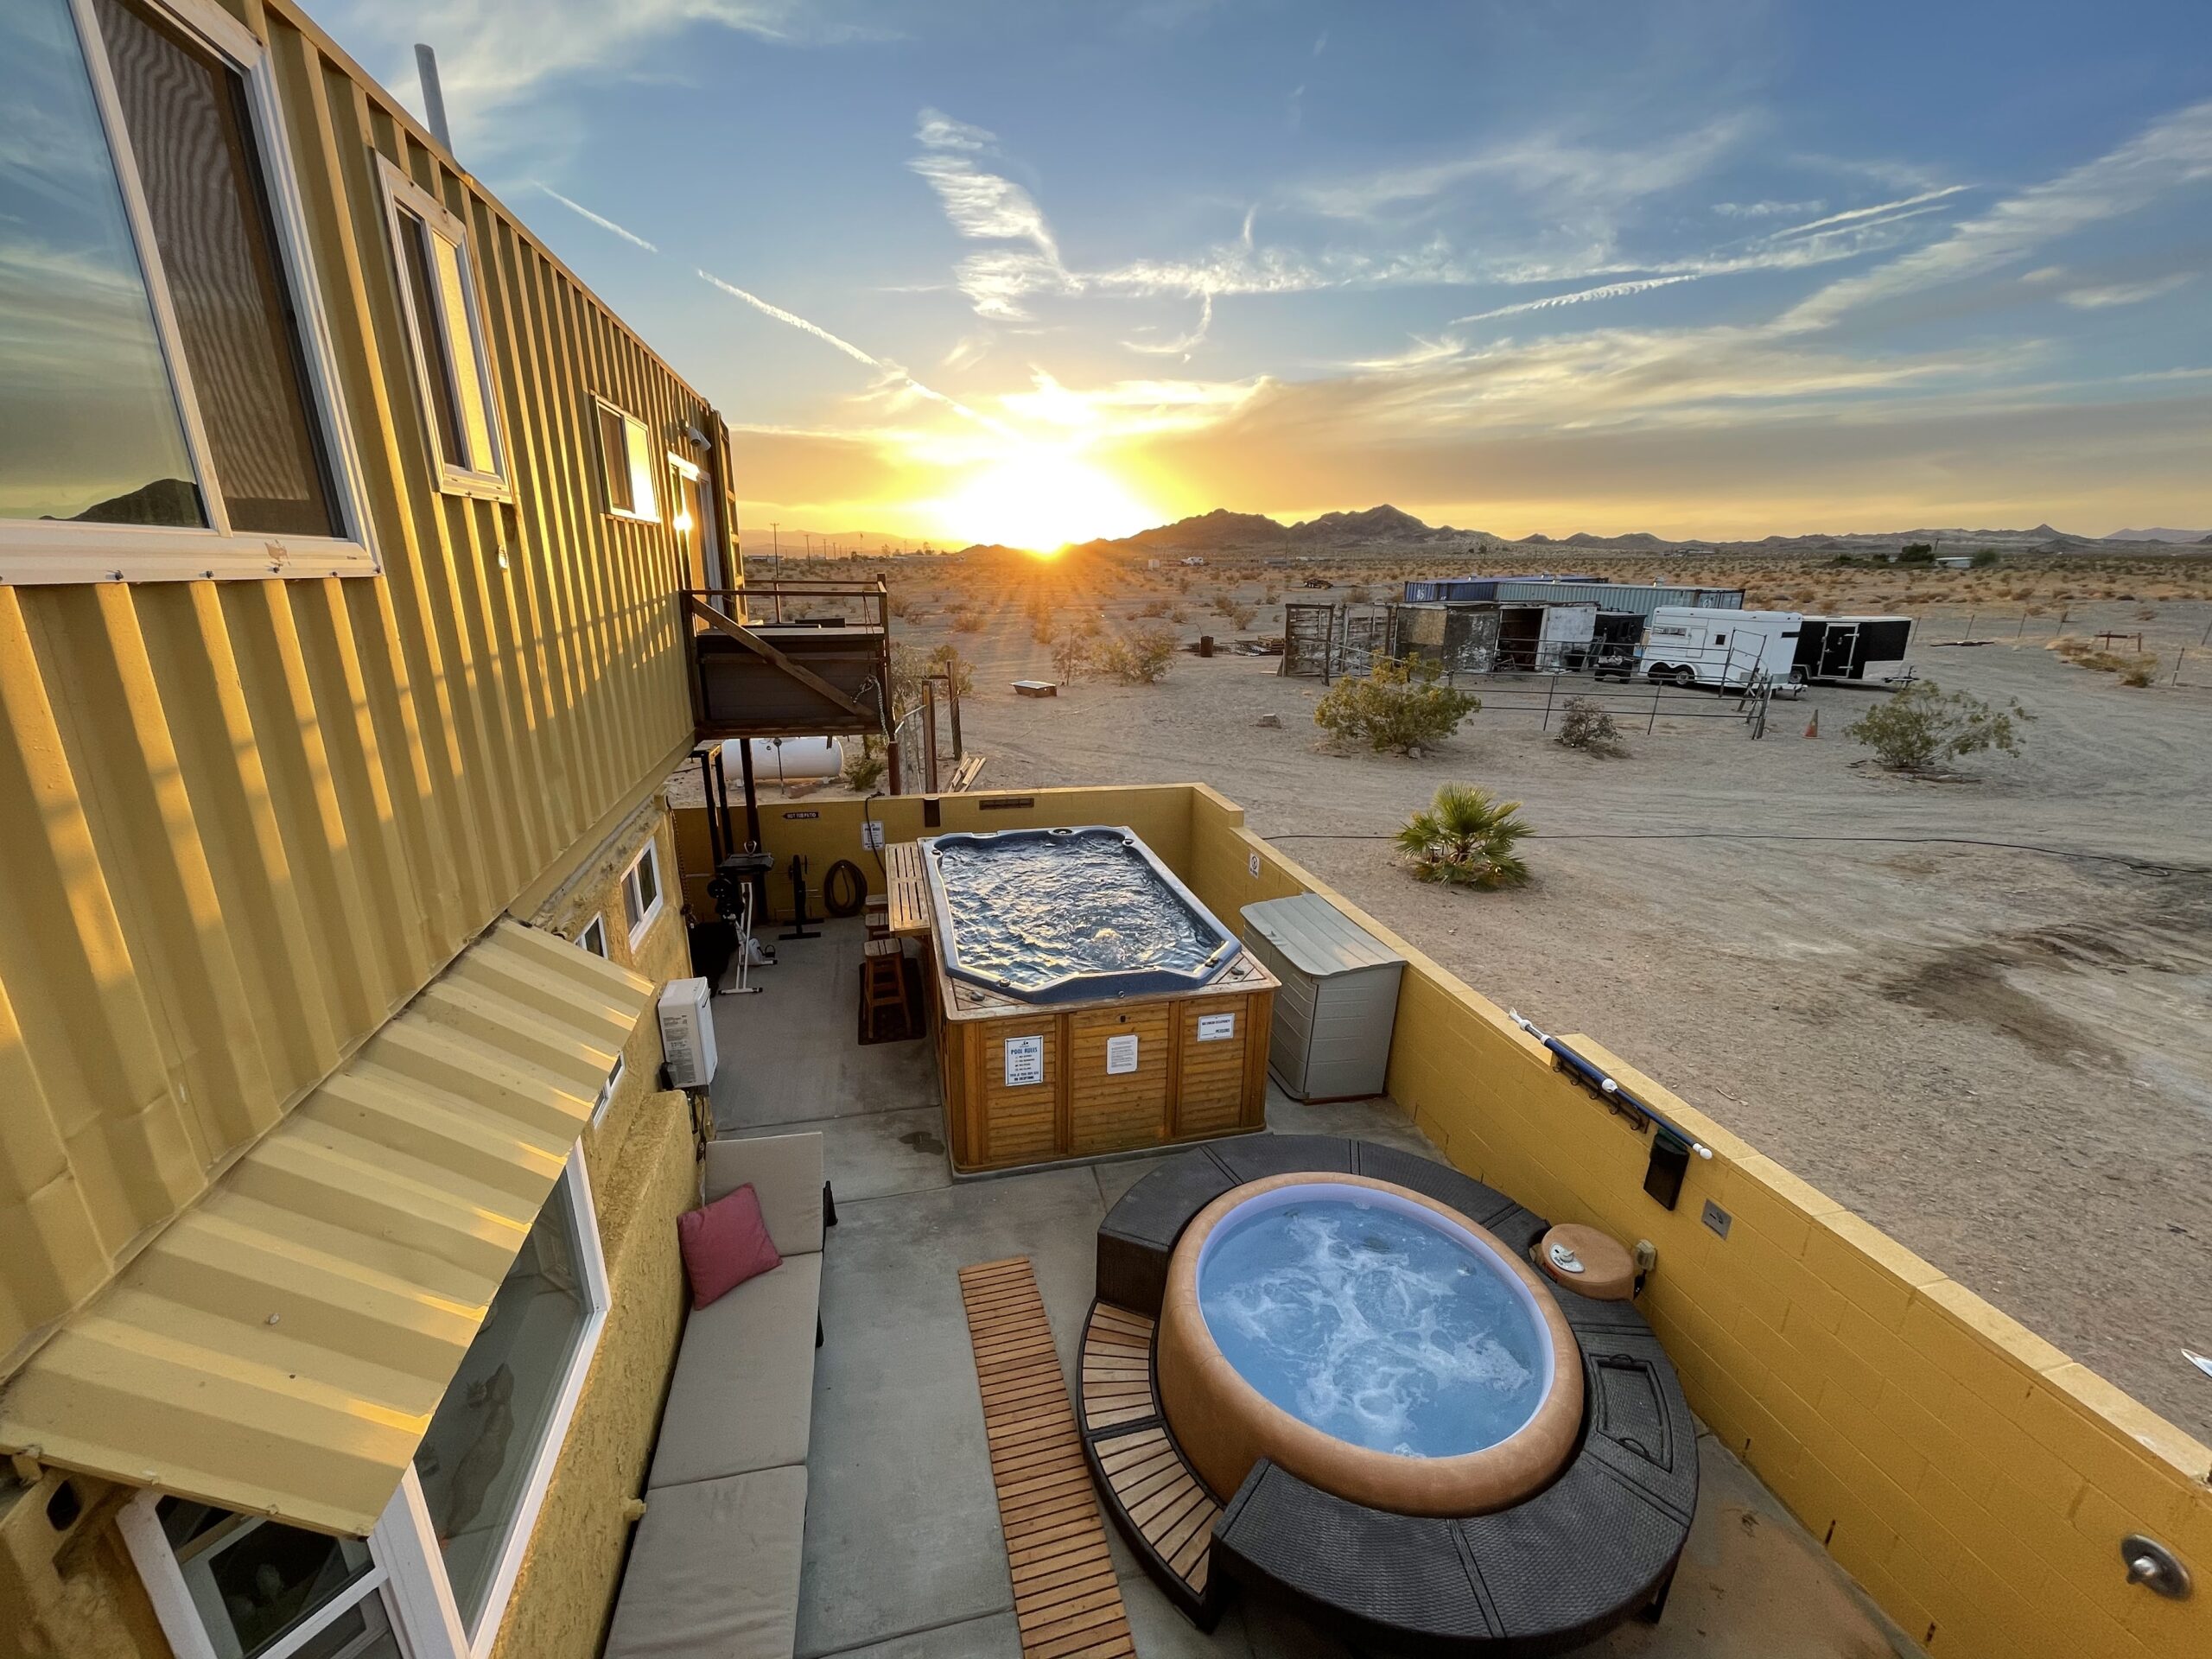 Exterior birds eye view of the pool and hot tub at Twentynine Palms vacation rental home called Desert Skybox Retreat.